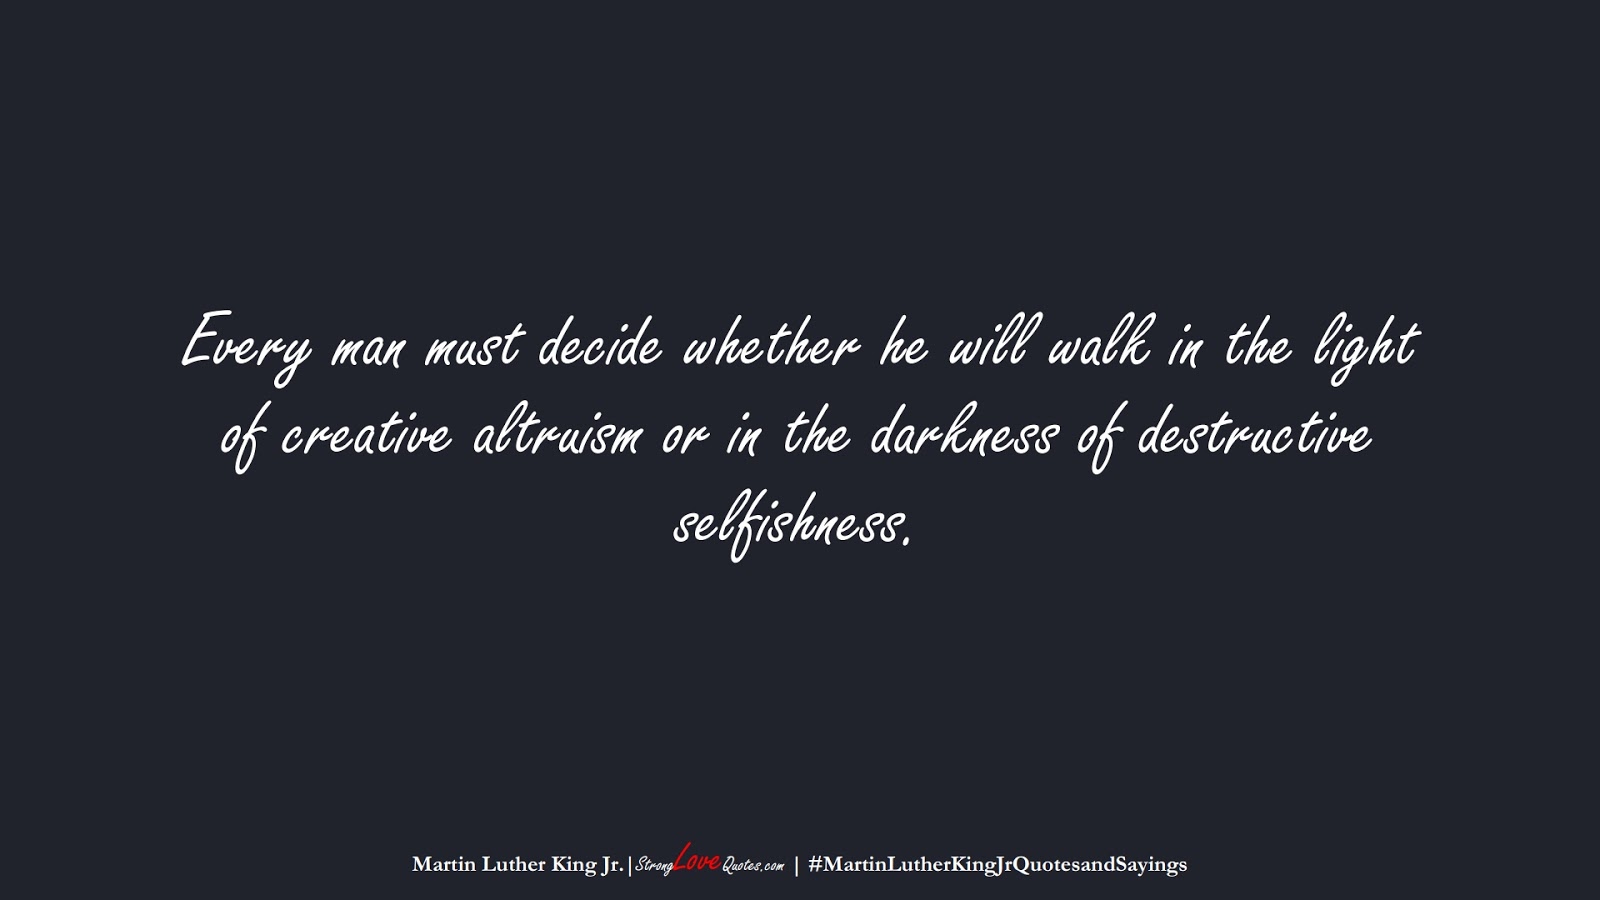 Every man must decide whether he will walk in the light of creative altruism or in the darkness of destructive selfishness. (Martin Luther King Jr.);  #MartinLutherKingJrQuotesandSayings